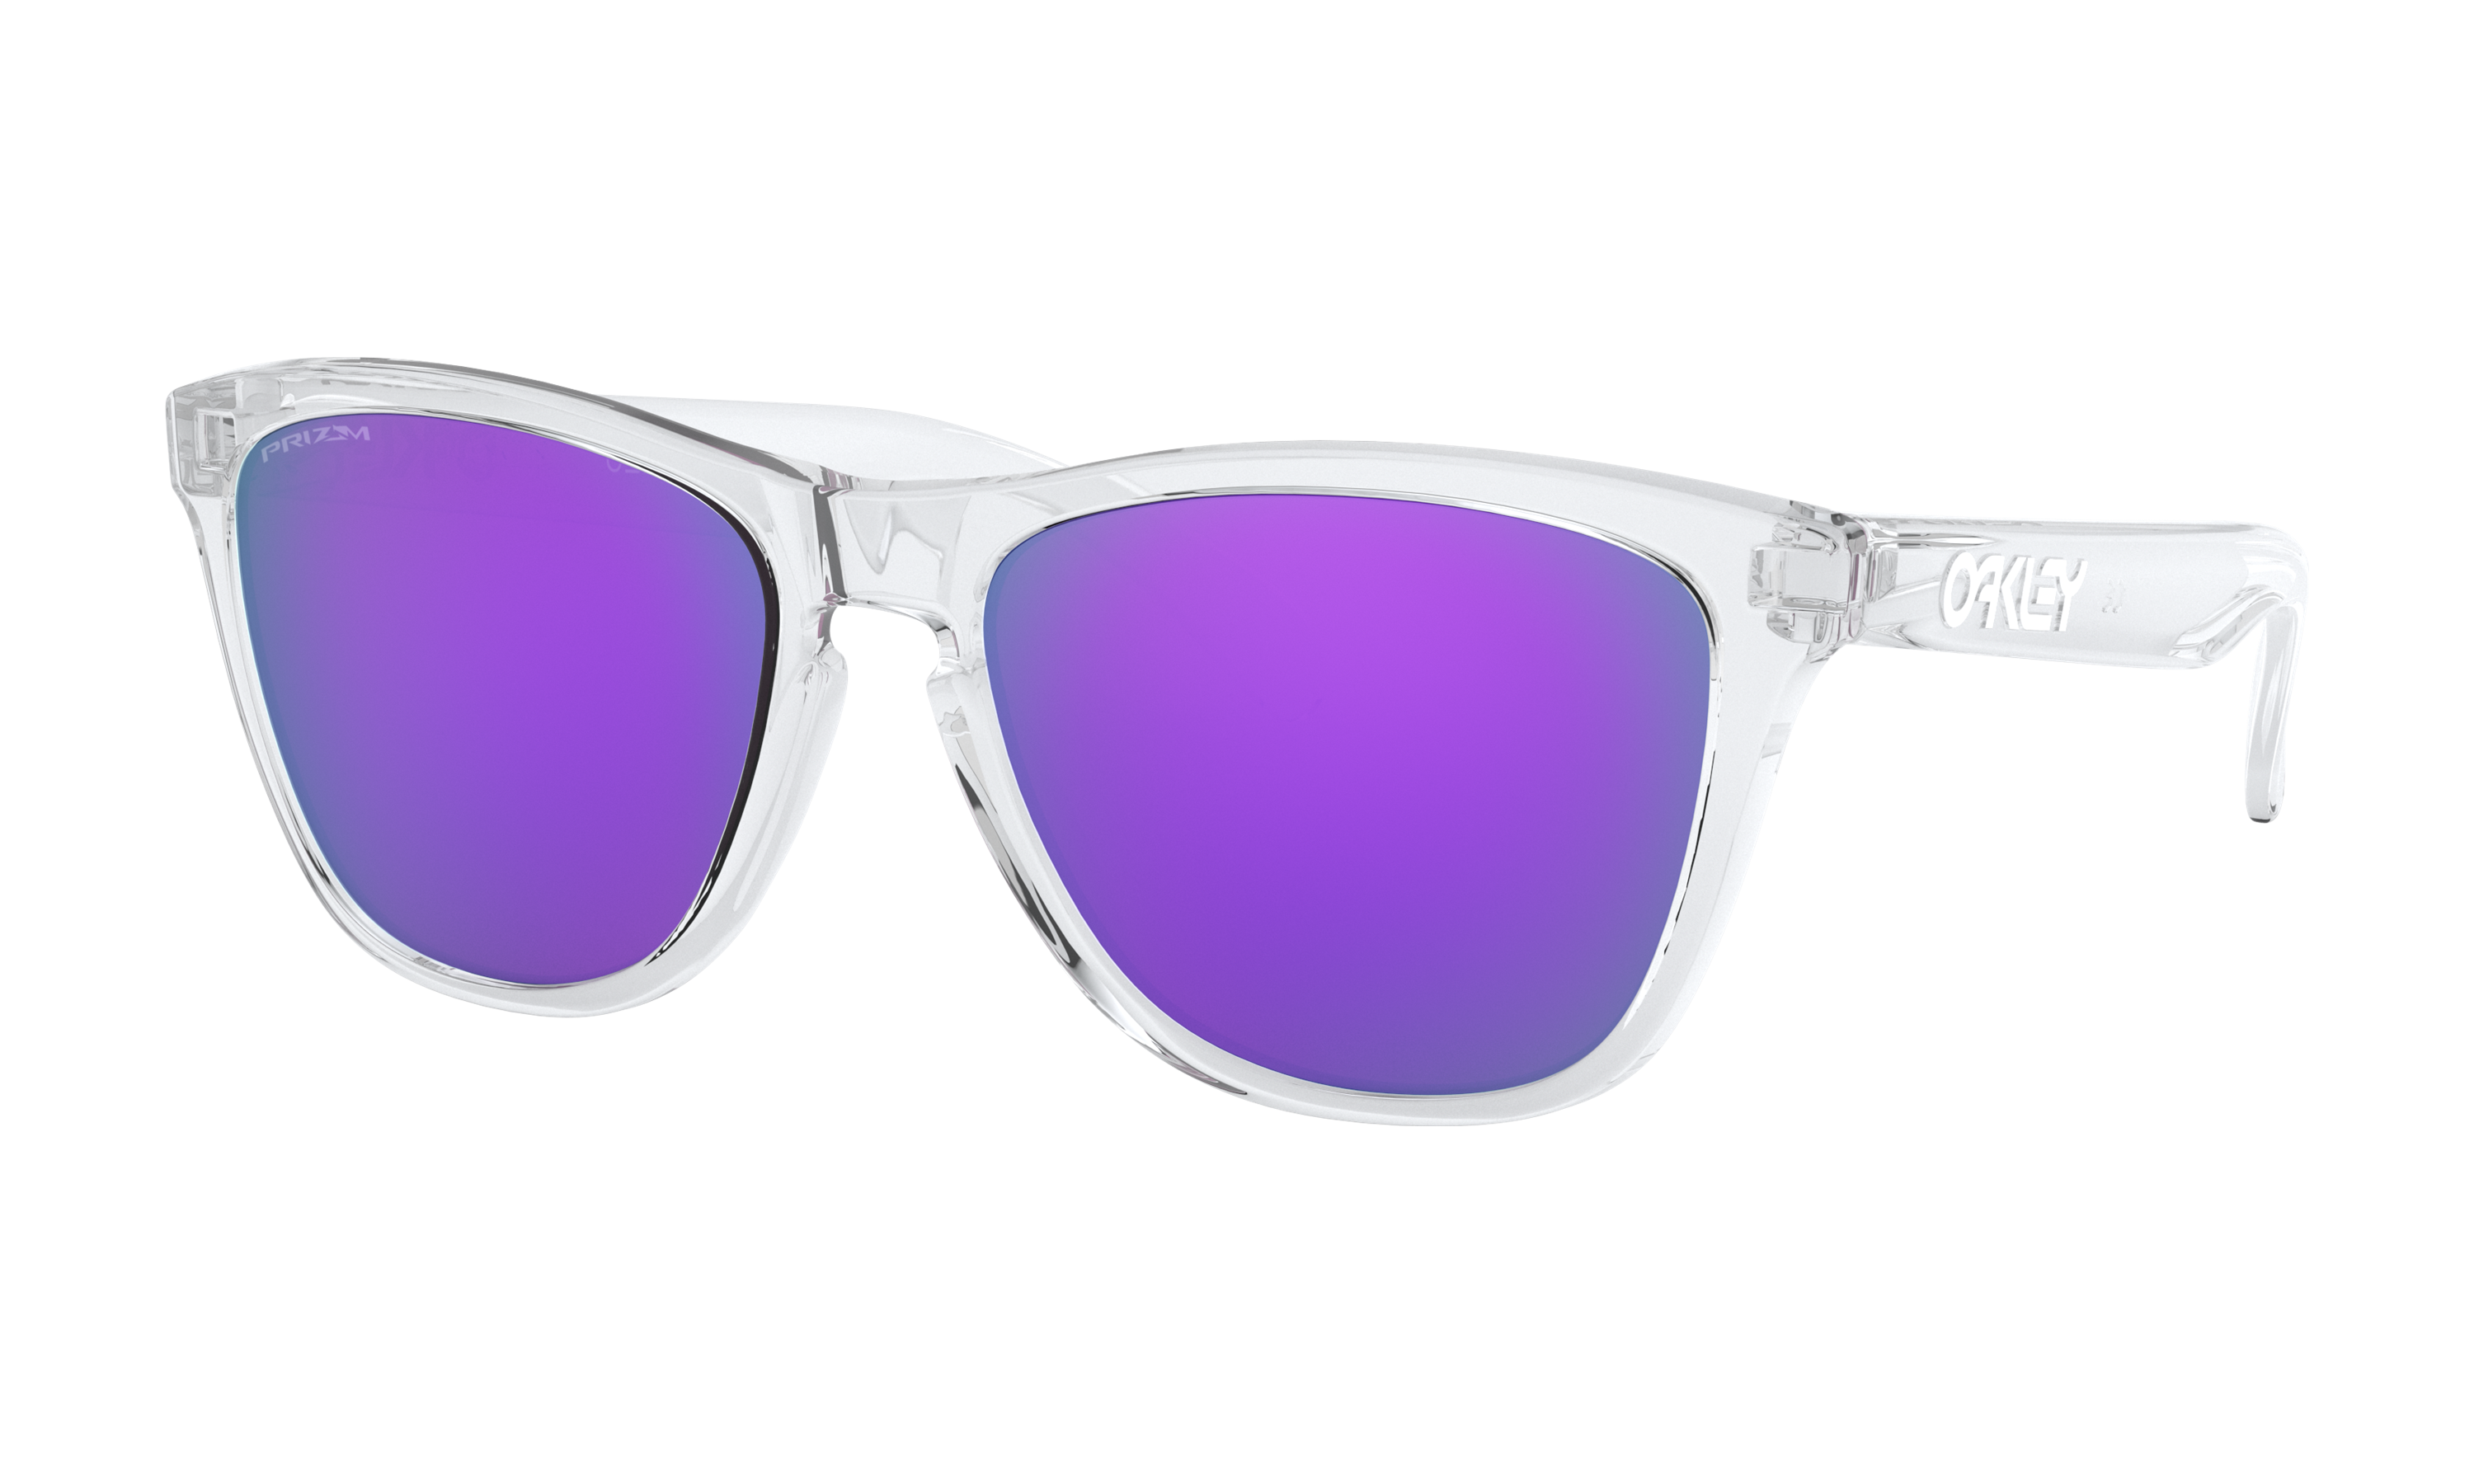 Women's Oakley Frogskins (Asia Fit) Sunglasses in Polished Clear Prizm Violet